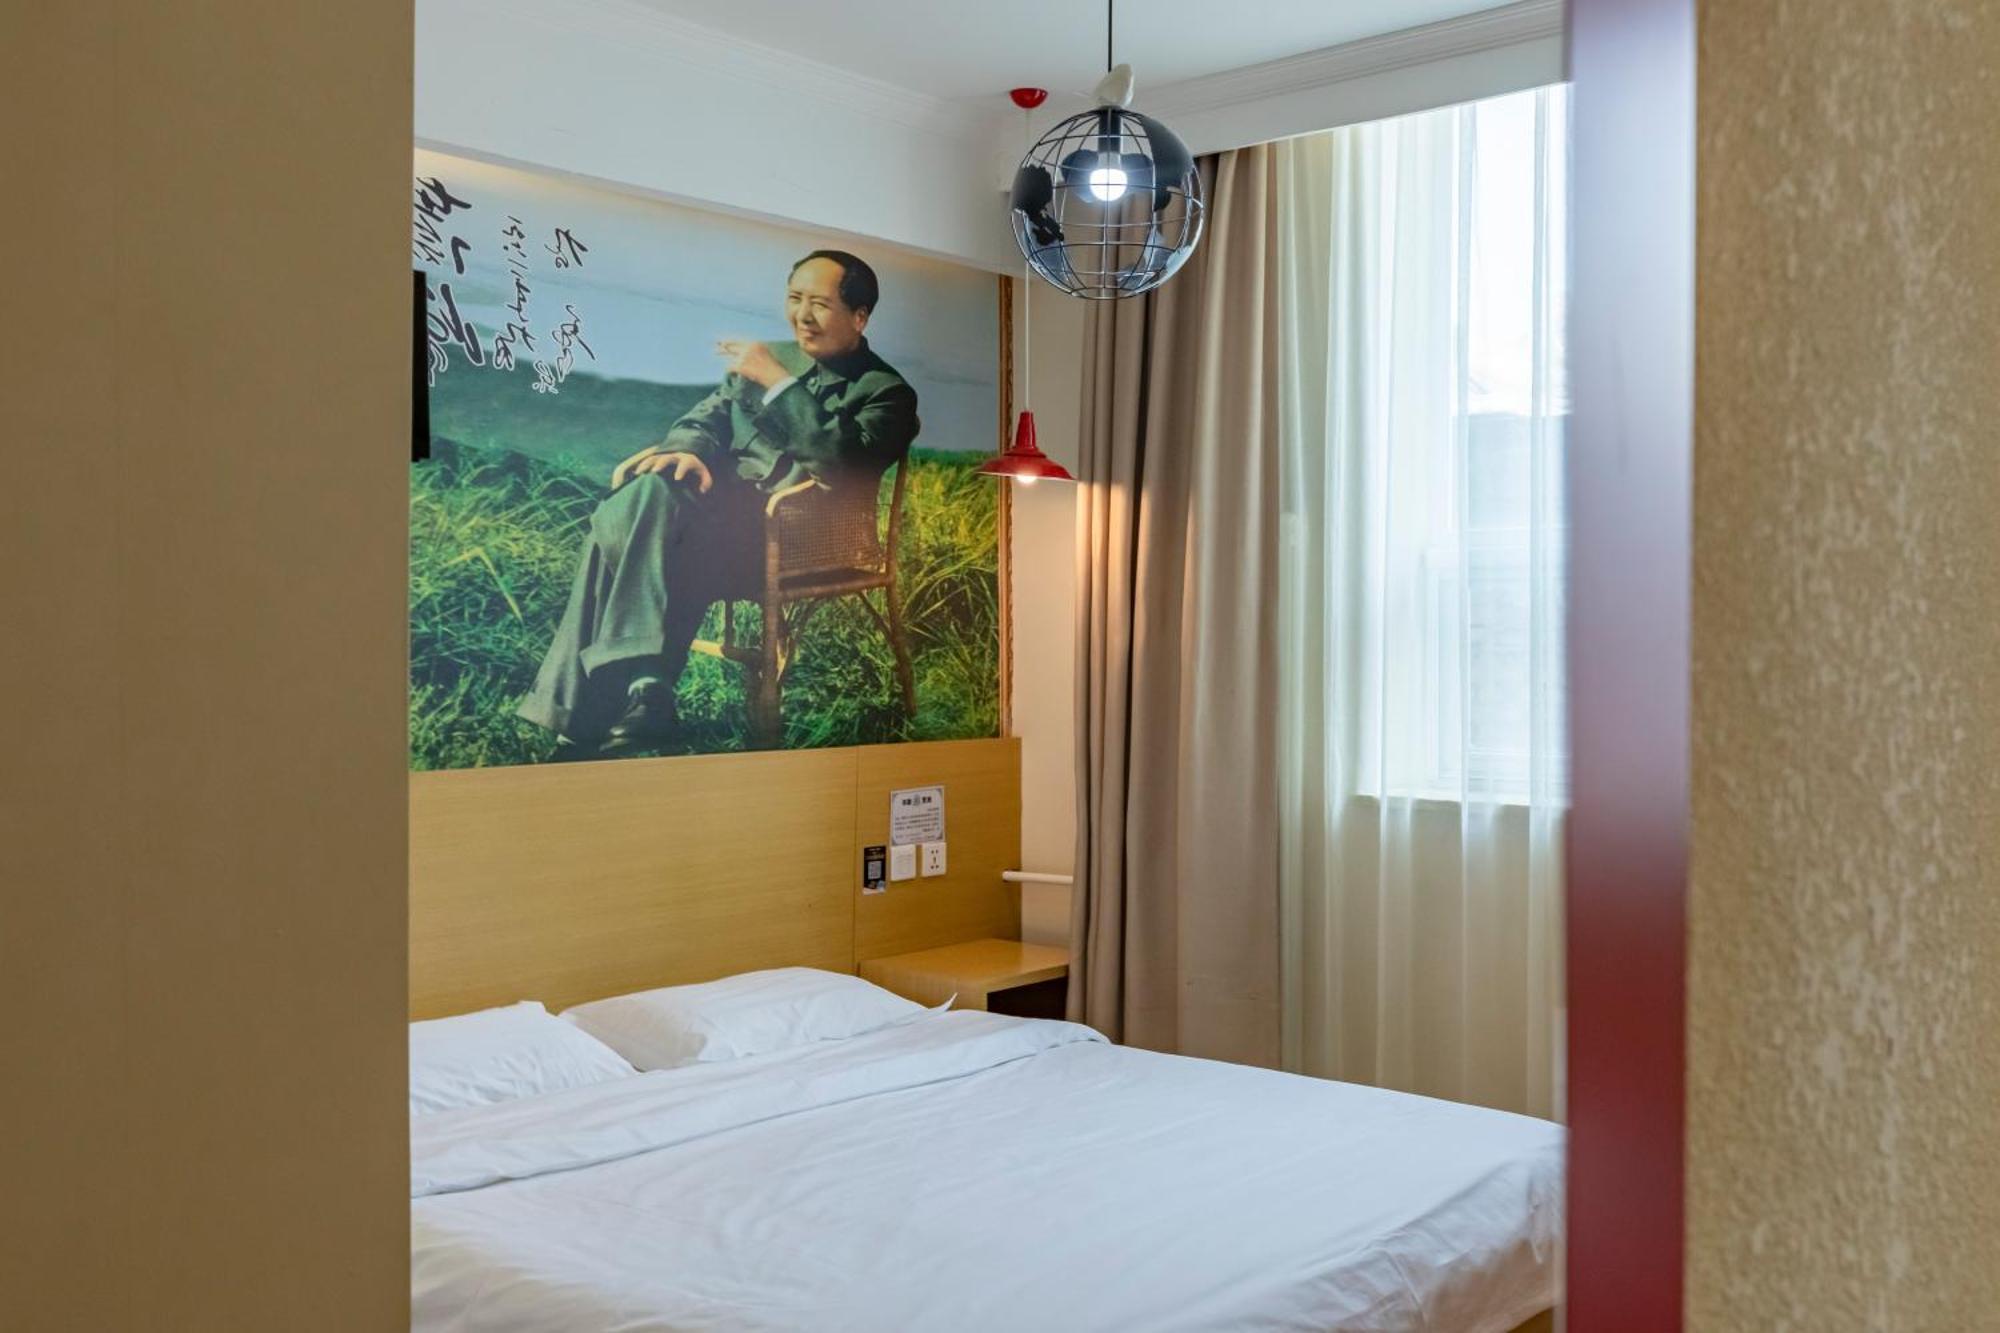 Happy Dragon Alley Hotel-In The City Center With Big Window&Free Coffe, Fluent English Speaking,Tourist Attractions Ticket Service&Food Recommendation,Near Tian Anmen Forbiddencity,Near Lama Temple,Easy To Walk To Nanluoalley&Shichahai Peking Exteriör bild